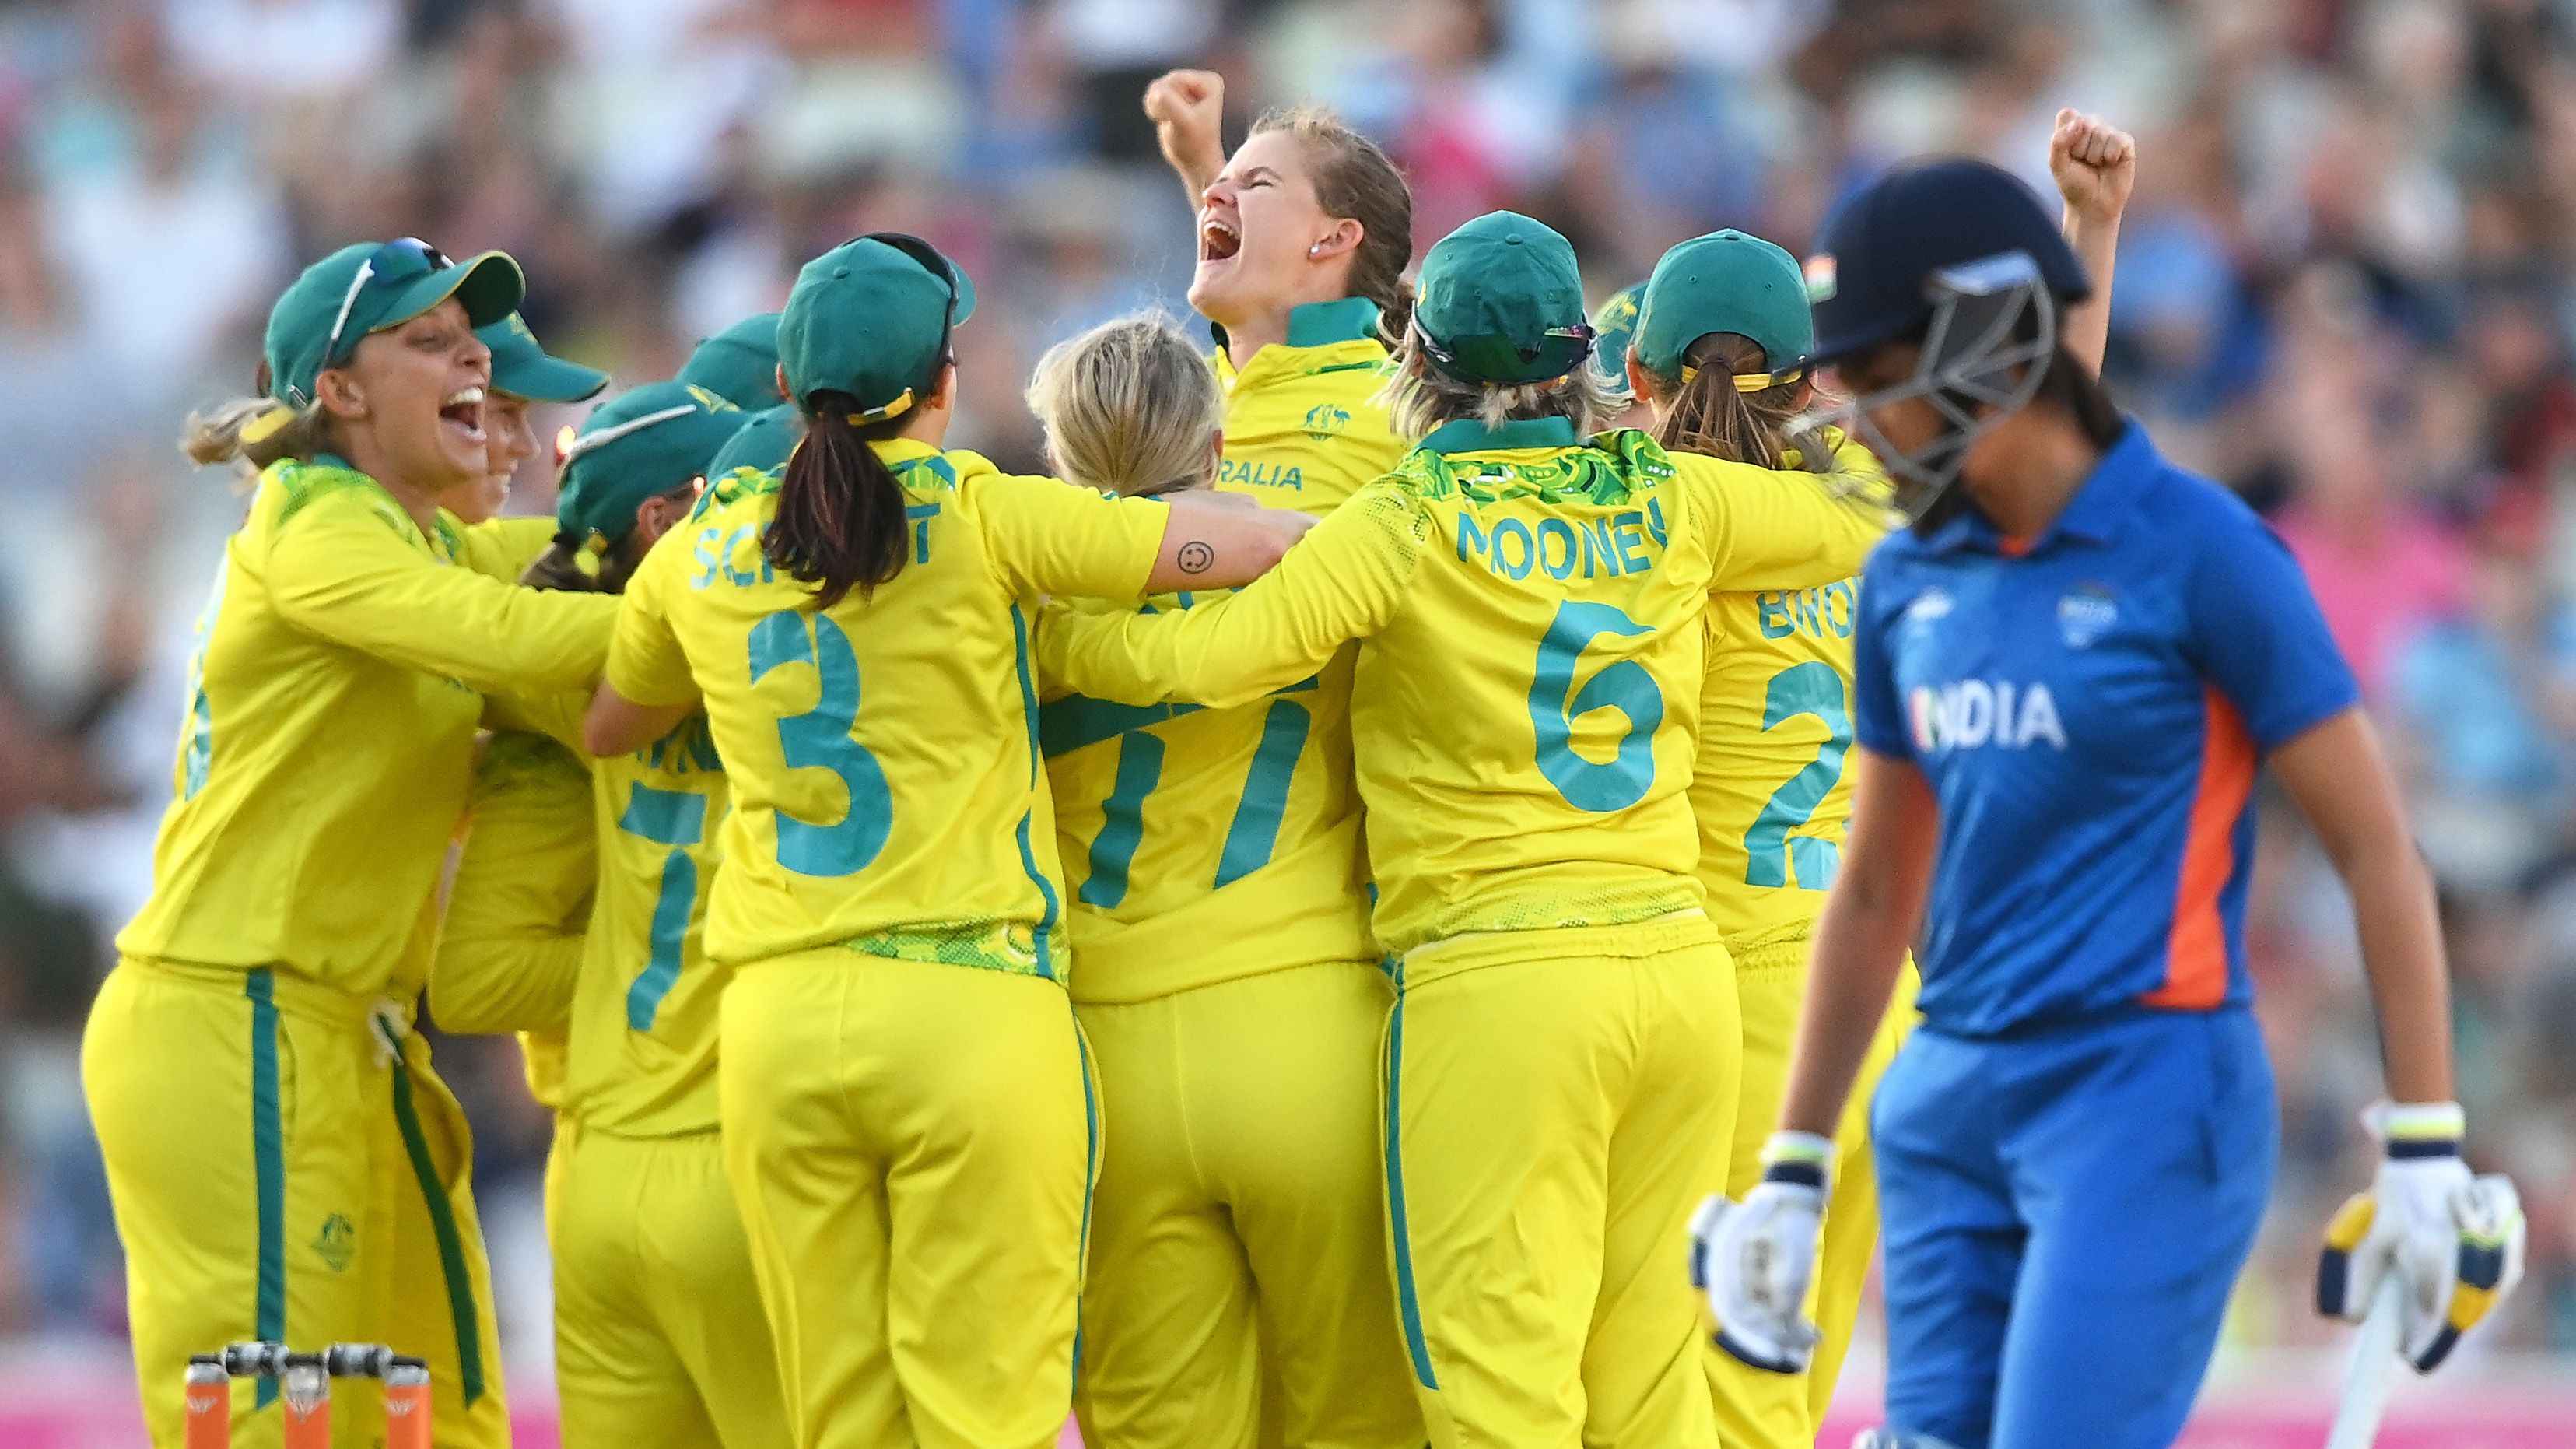 Australia celebrate as Jess Jonassen takes the wicket of Taniya Bhatia to win the match and the gold medal during the Cricket T20 - Gold Medal match between Australia and India on day ten of the Birmingham 2022 Commonwealth Games at Edgbaston on August 07, 2022 on the Birmingham, England. (Photo by Alex Davidson/Getty Images)